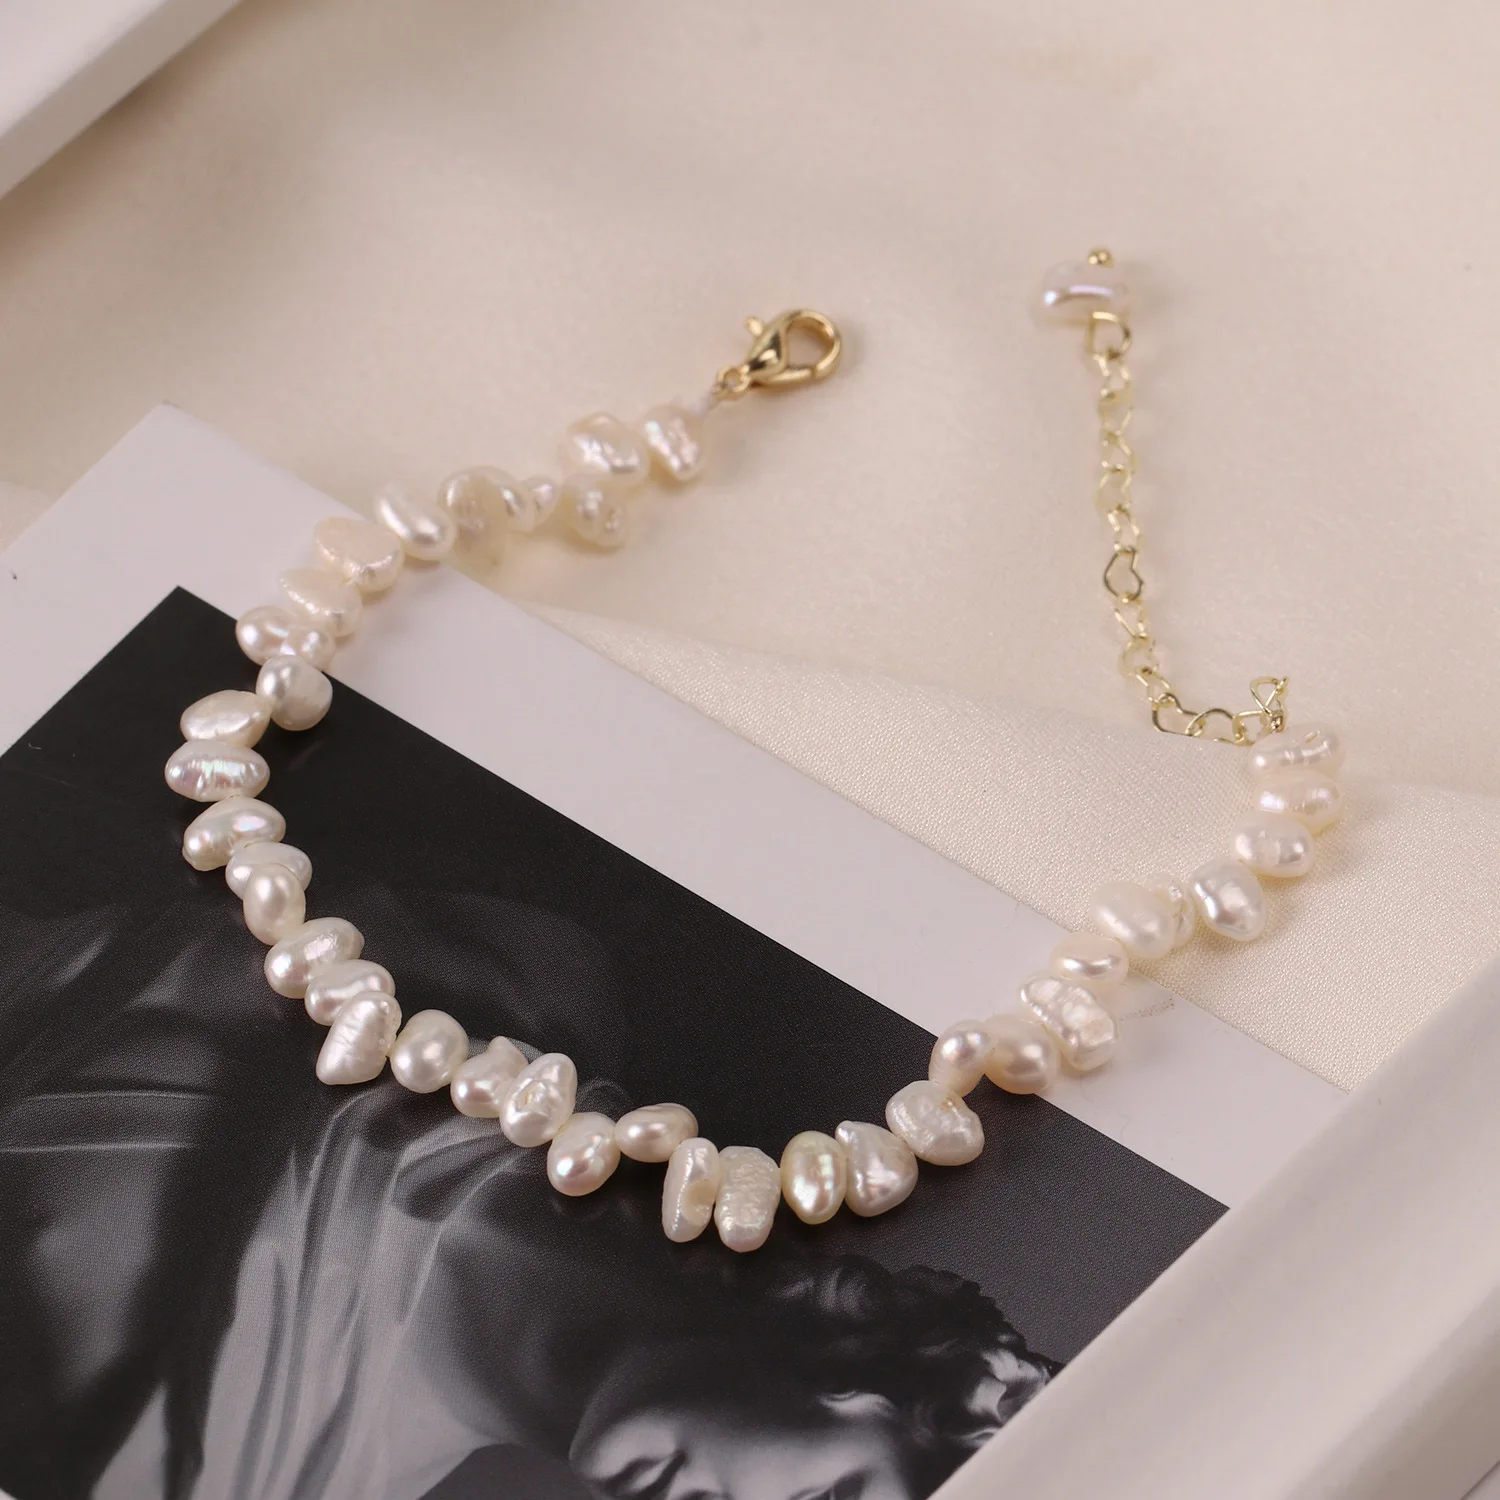 

2021 Vintage Baroque Natural Pearl Bracelet Necklace For Women, As pic shown